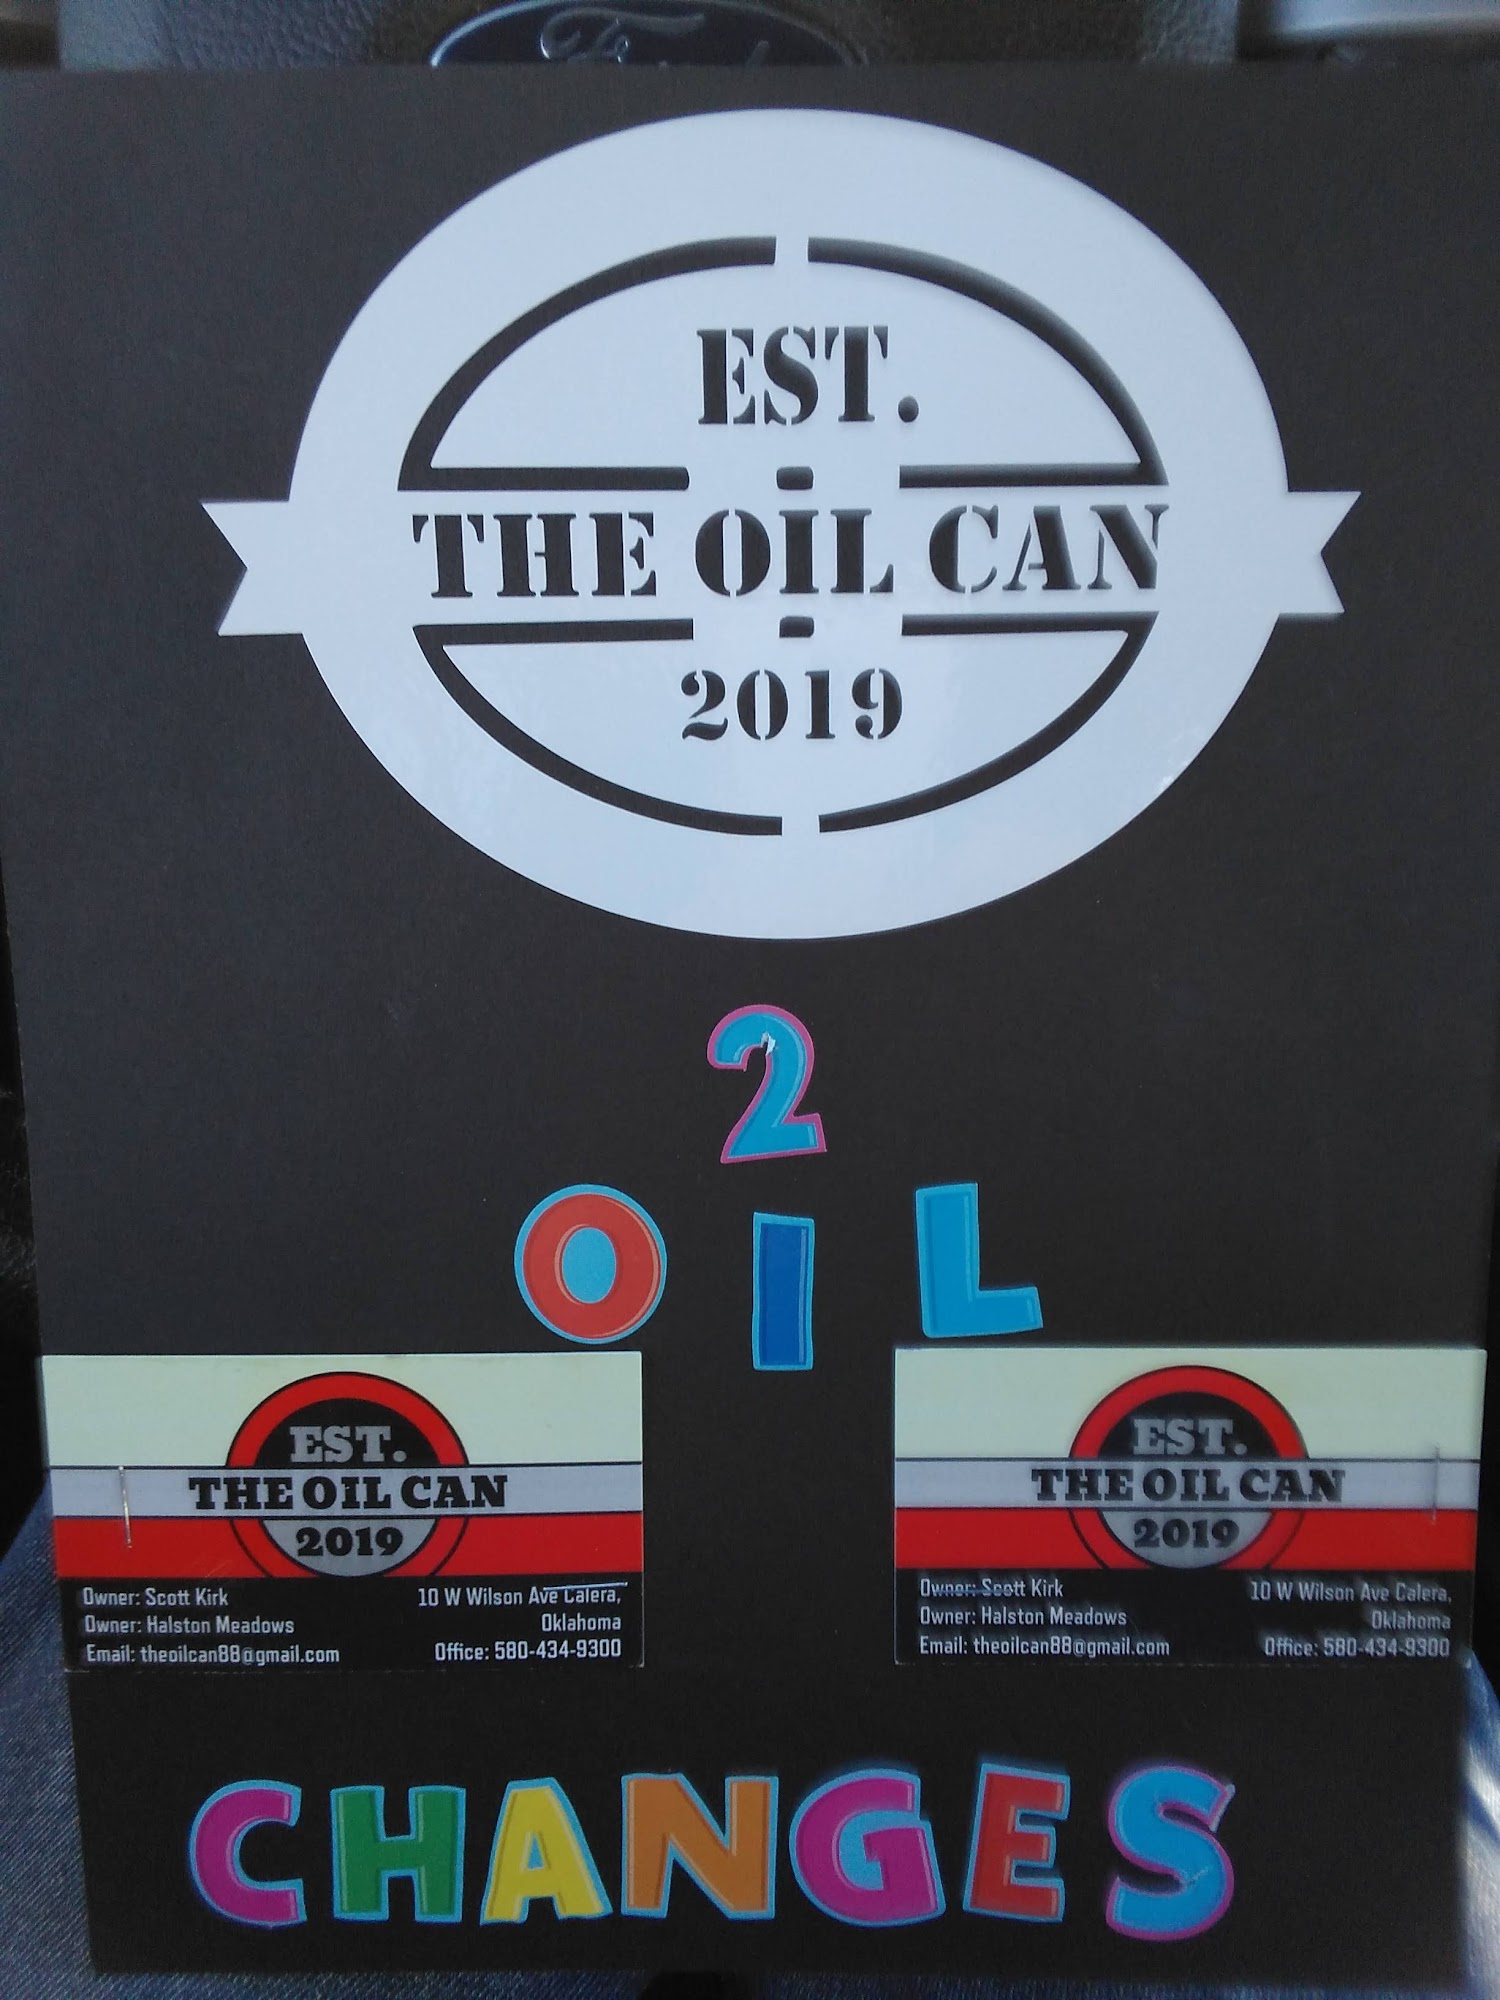 The Oil Can